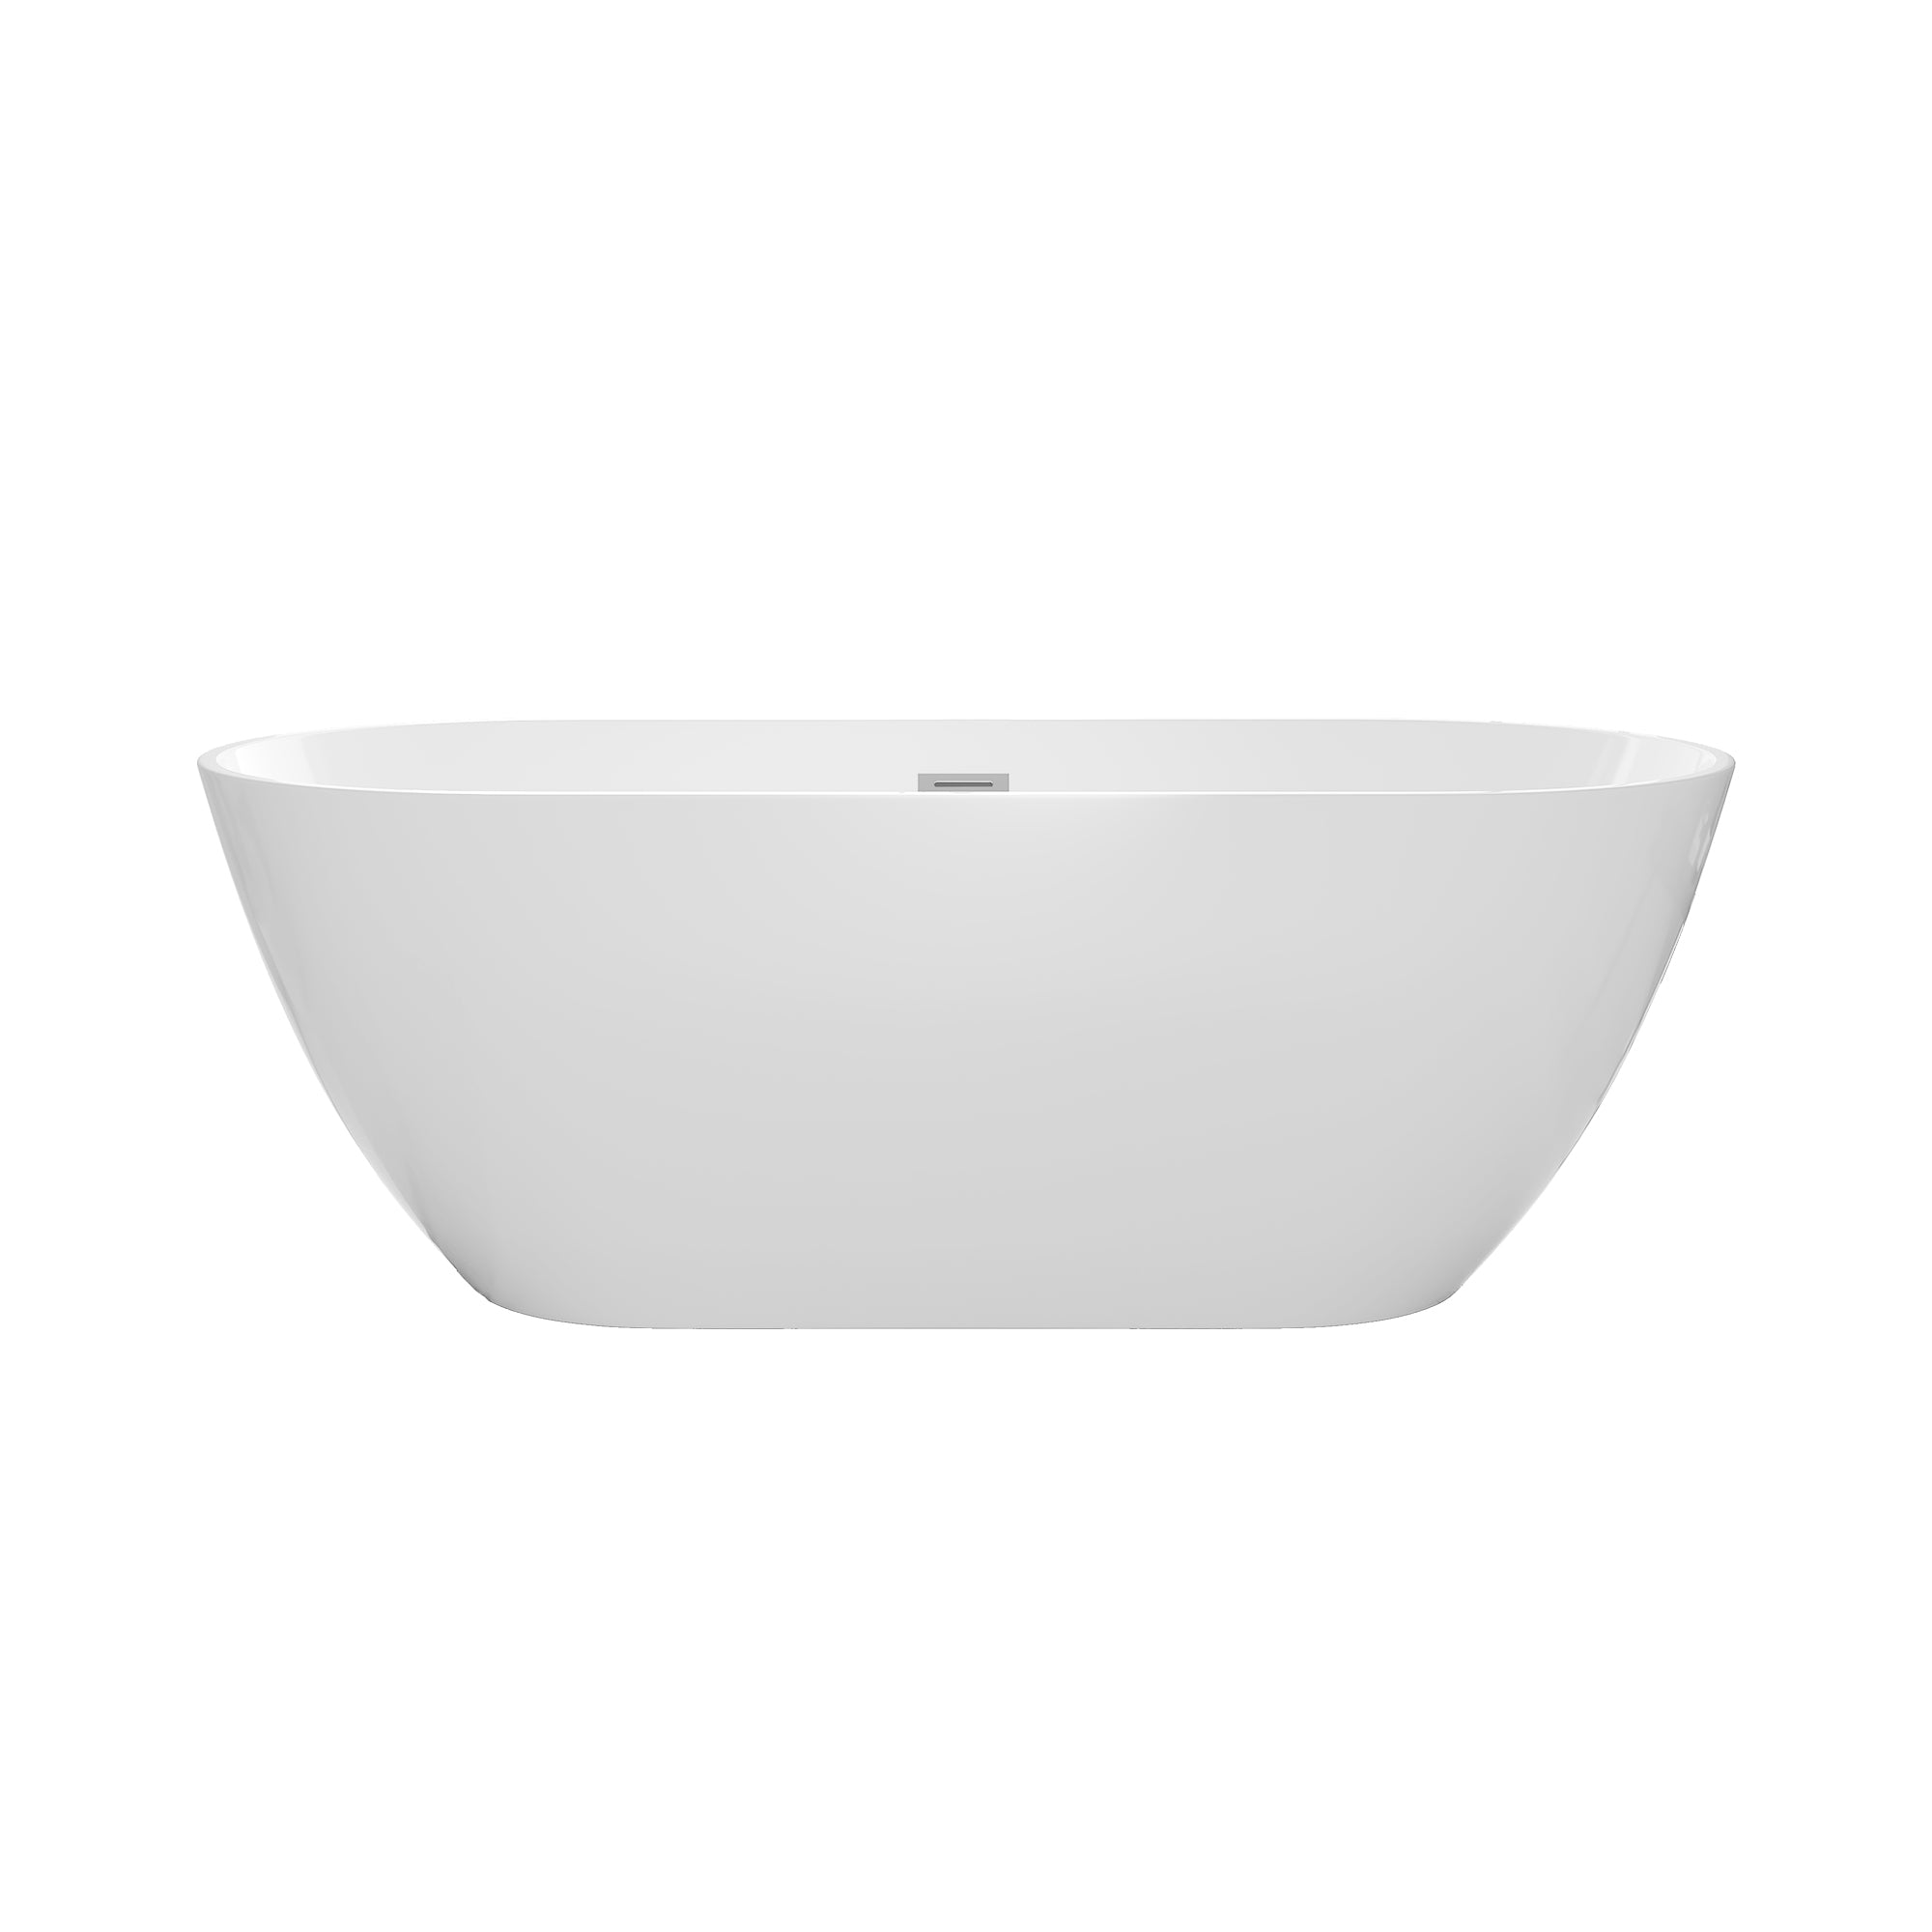 55" Oval Acrylic Freestanding Soaking Bathtub with Overflow RX-A02-55